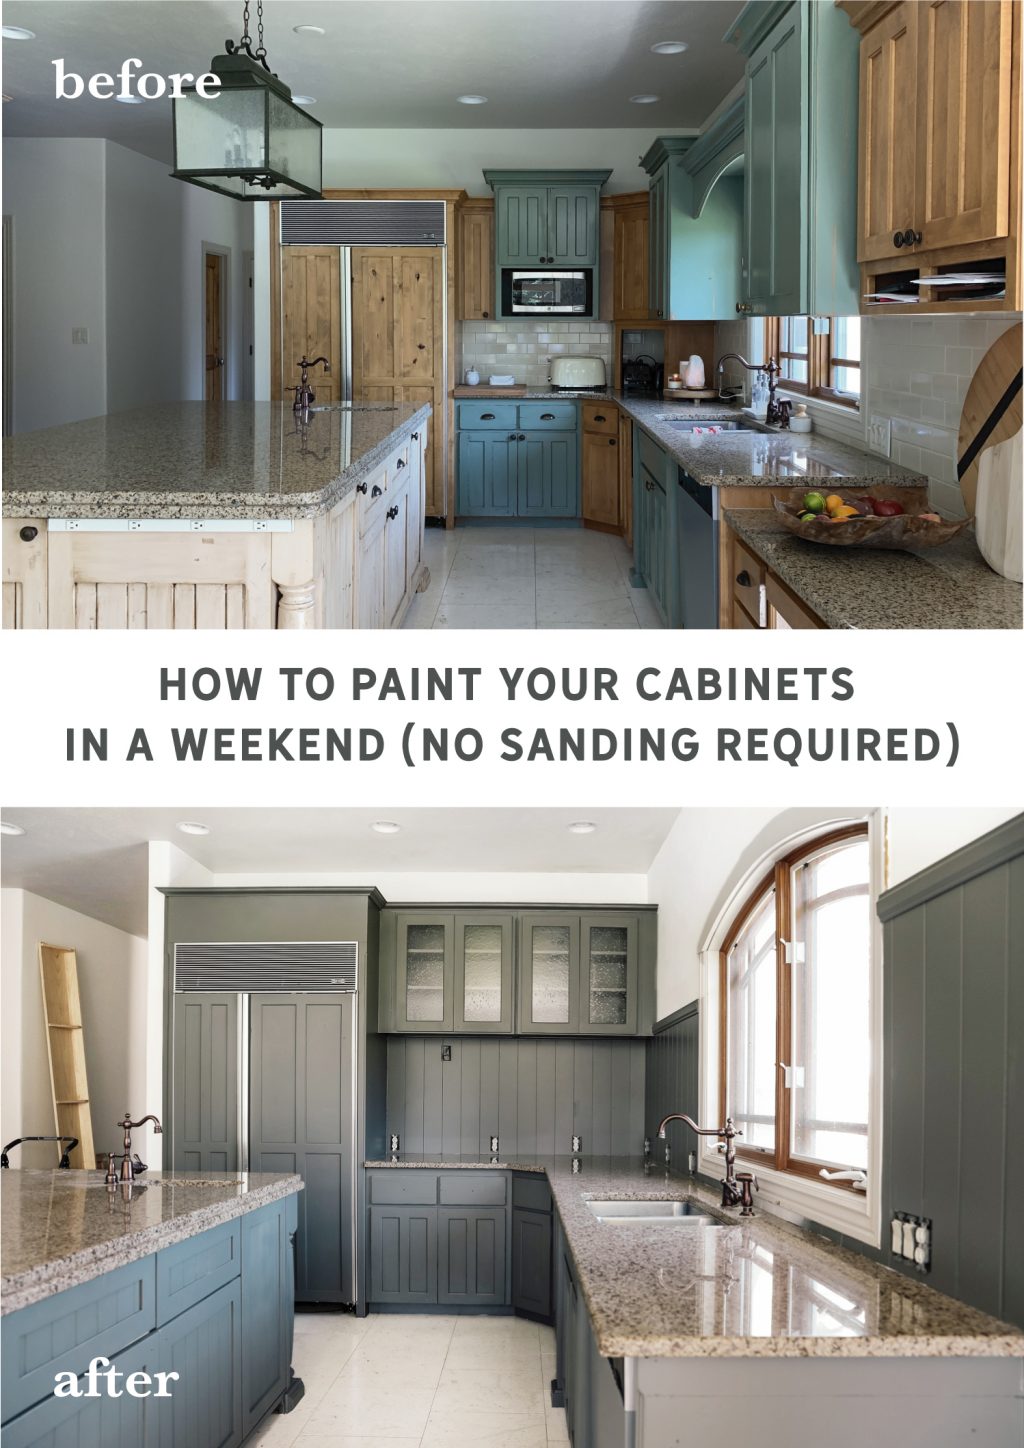 How To Paint Your Cabinets In A Weekend, Paint Your Own Kitchen Cupboard Doors